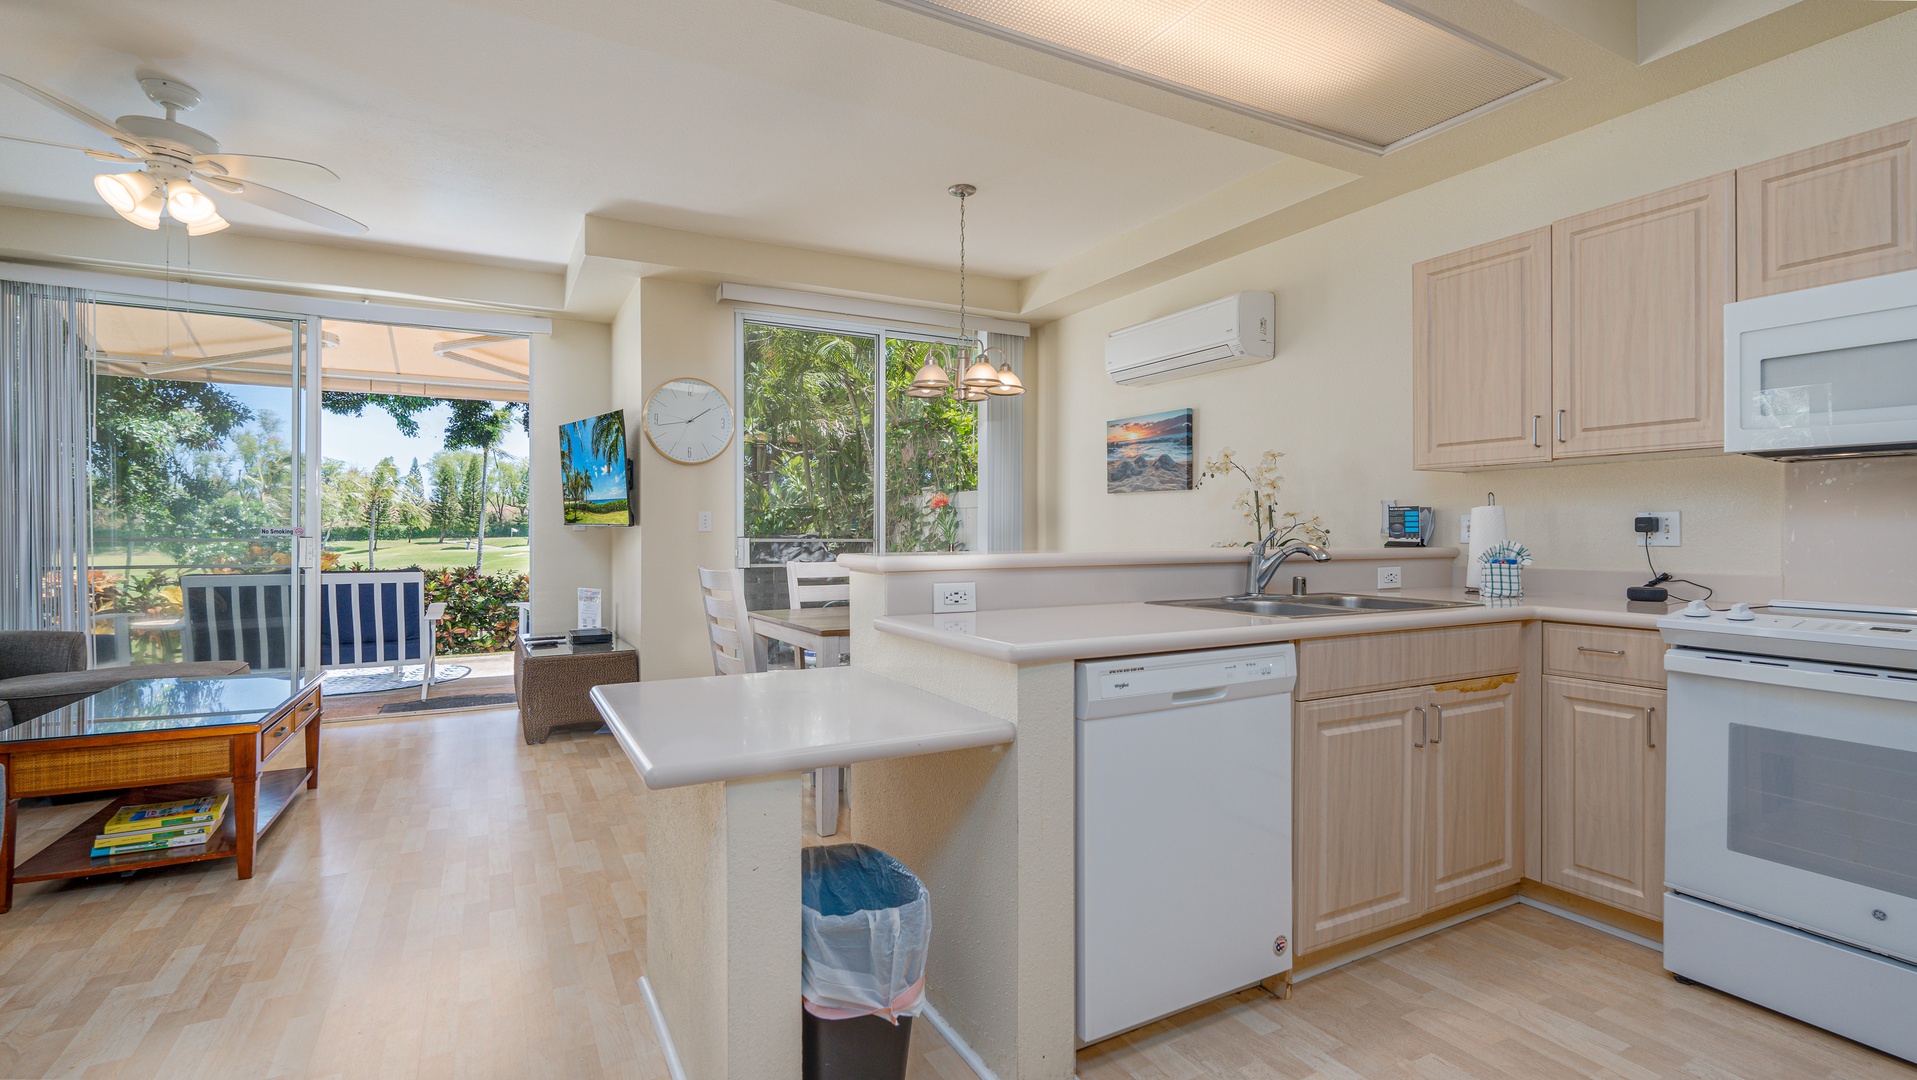 Kapolei Vacation Rentals, Fairways at Ko Olina 18C - There's counter space for appetizers on game night!